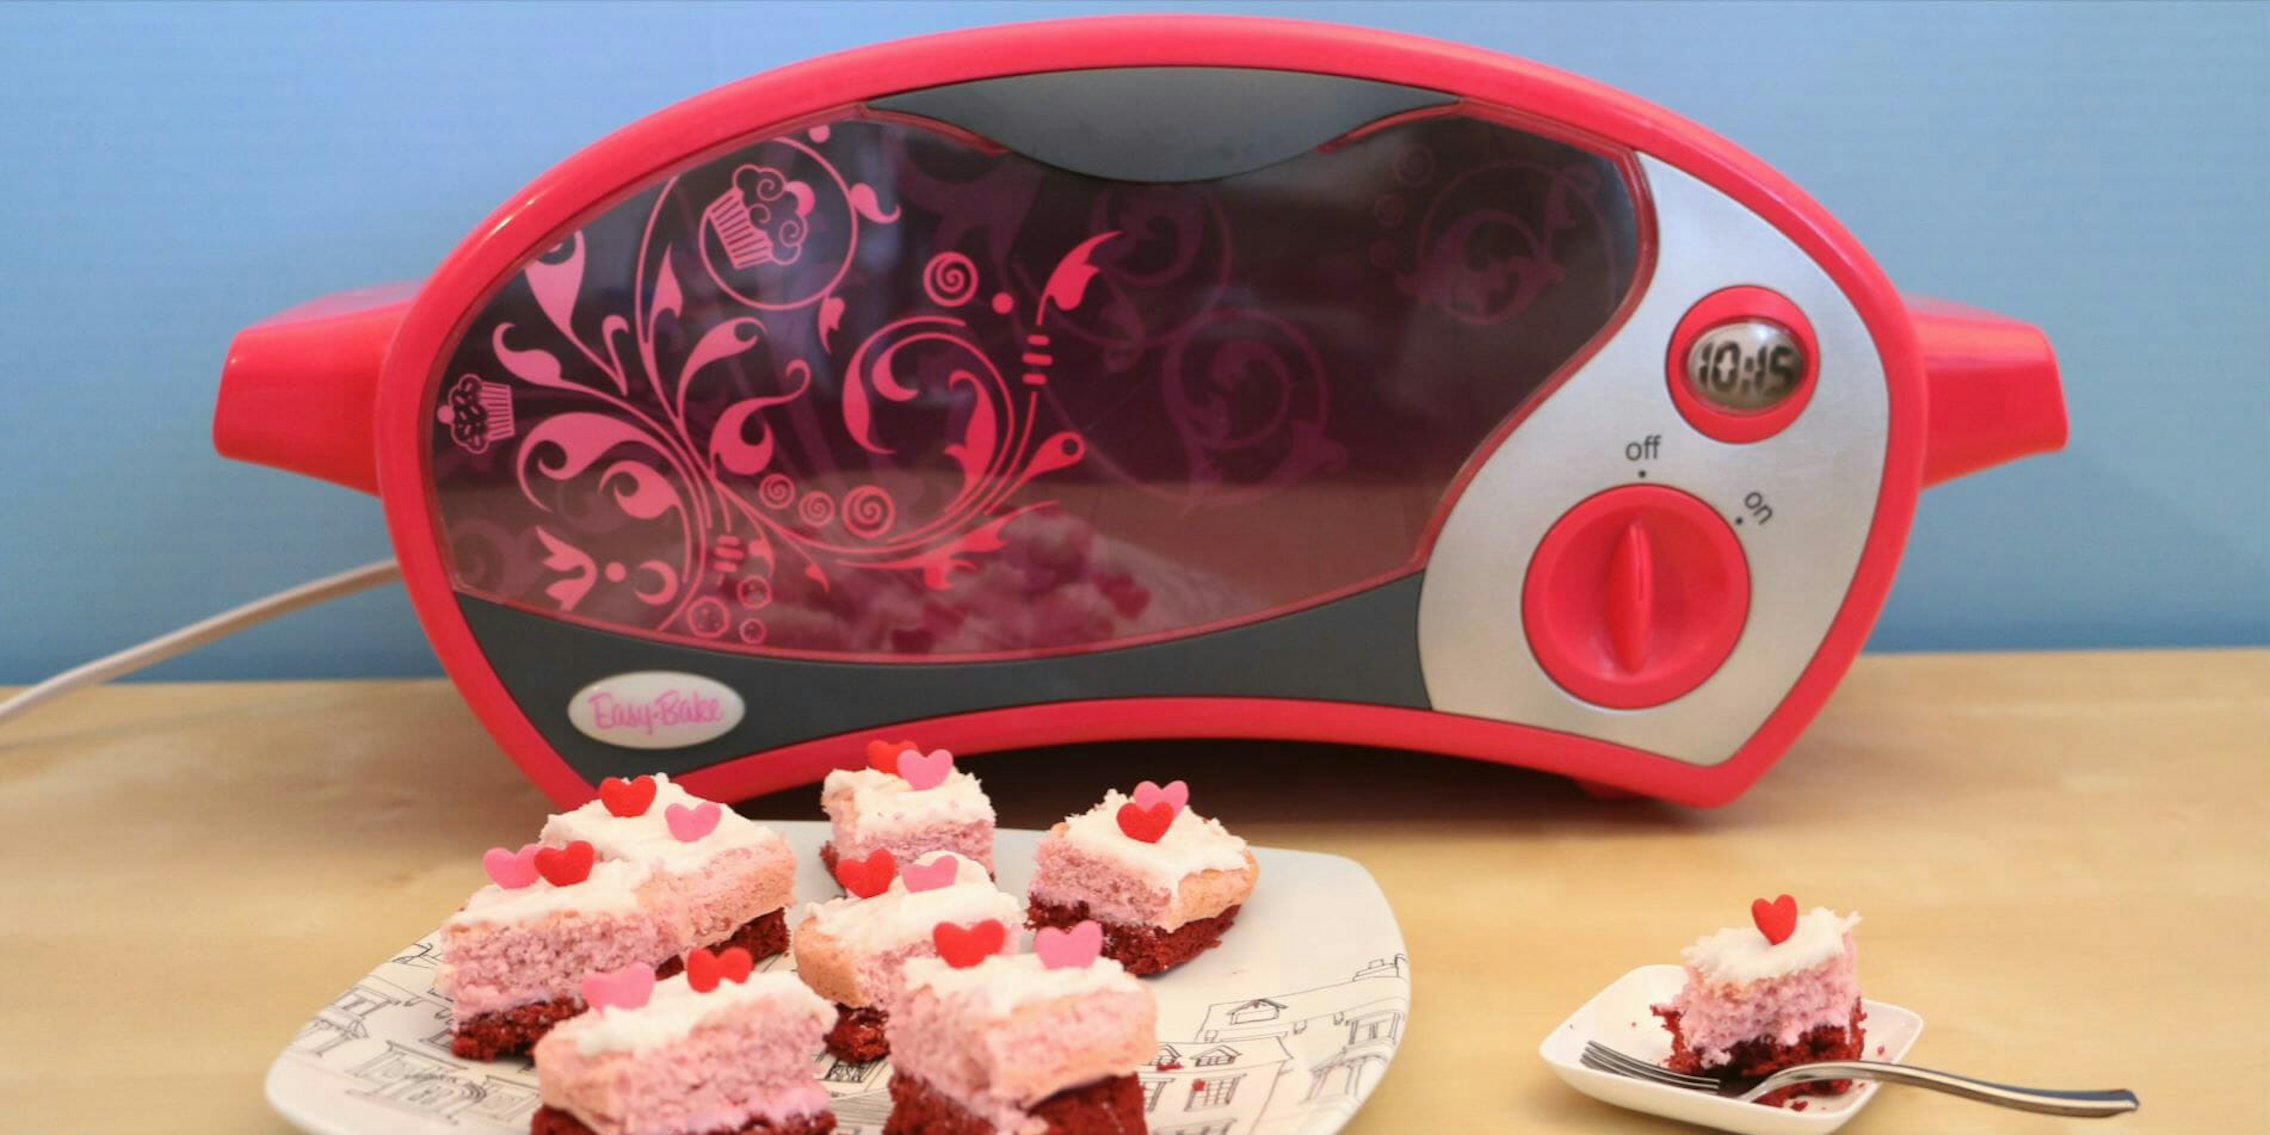 Easy Bake Oven Accessories for sale